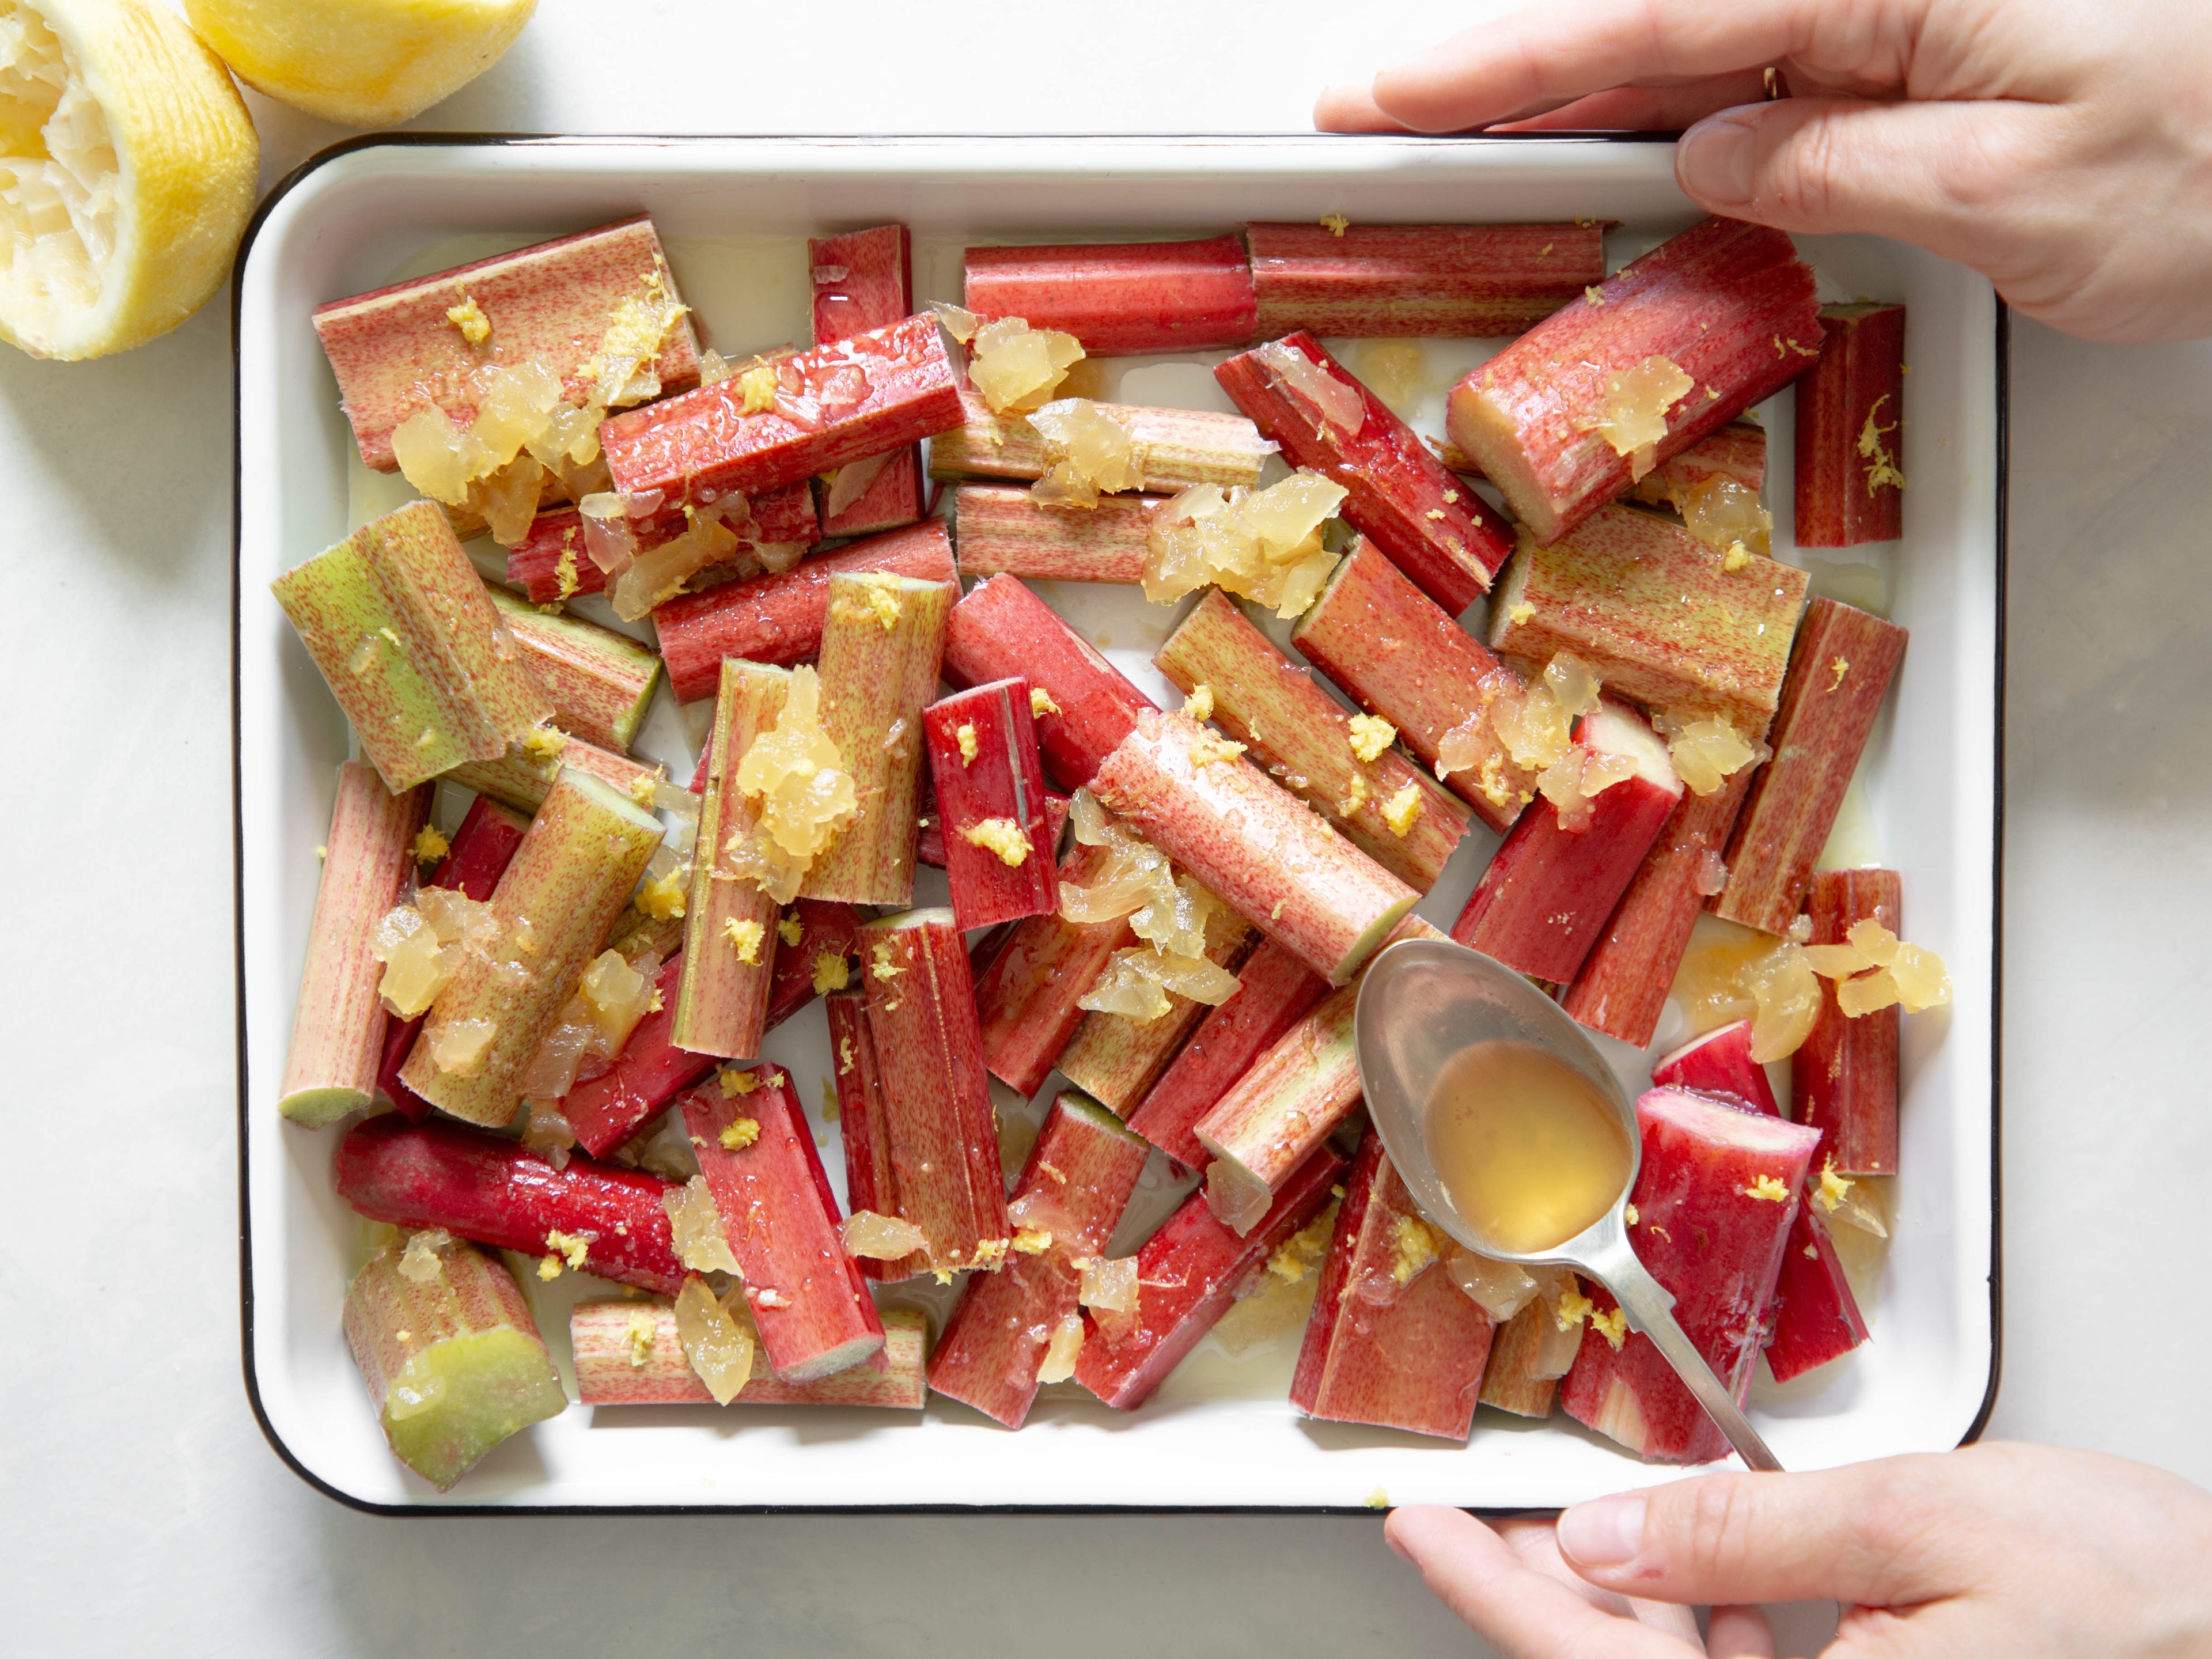 Baking dish full of chopped fresh rhubarb and two hands holding the right hand side. In the top left corner there is a squeezed lemon